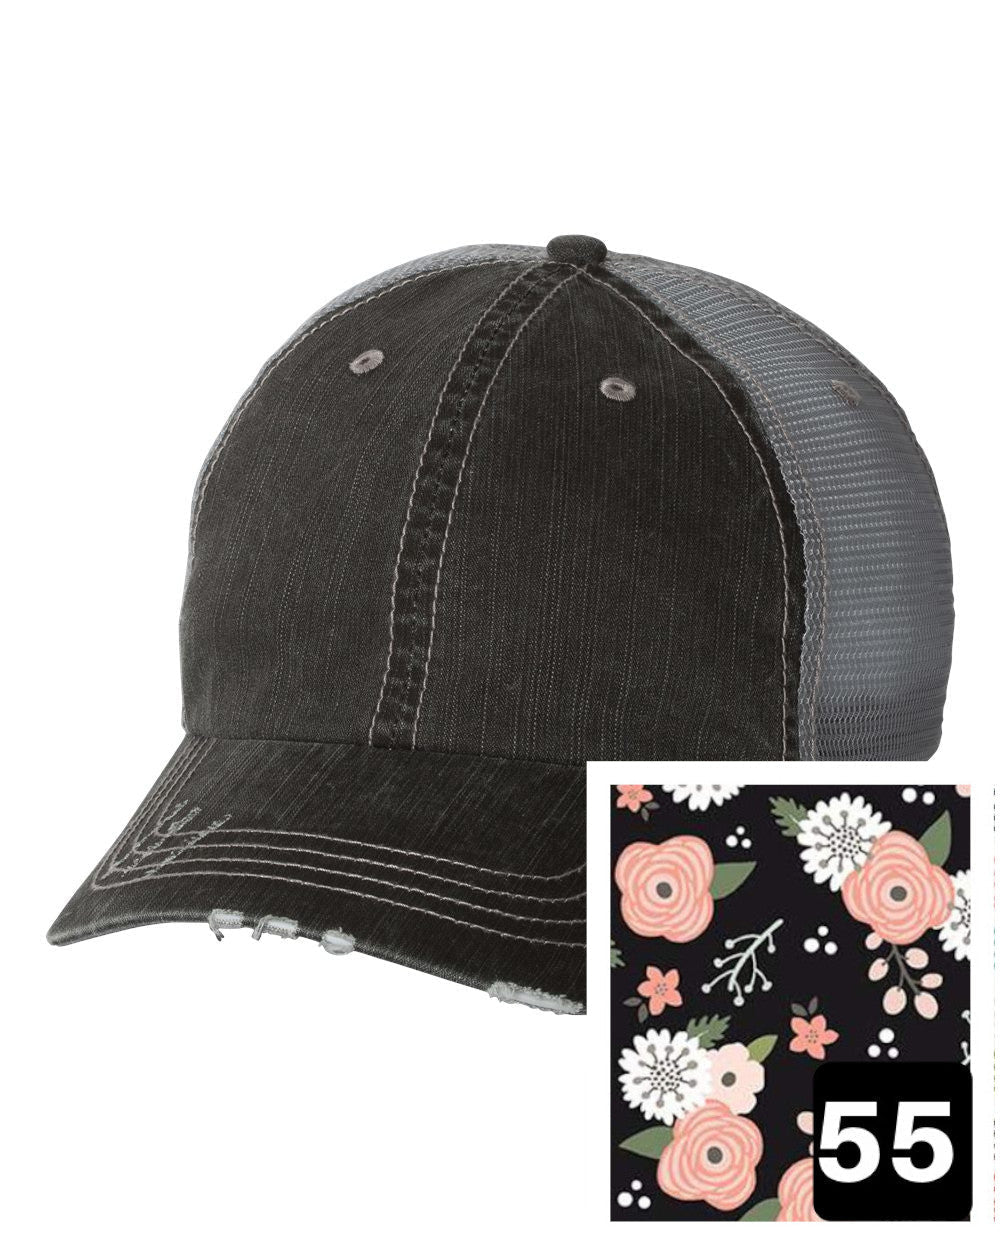 gray distressed trucker hat with petite floral on navy fabric state of New Hampshire